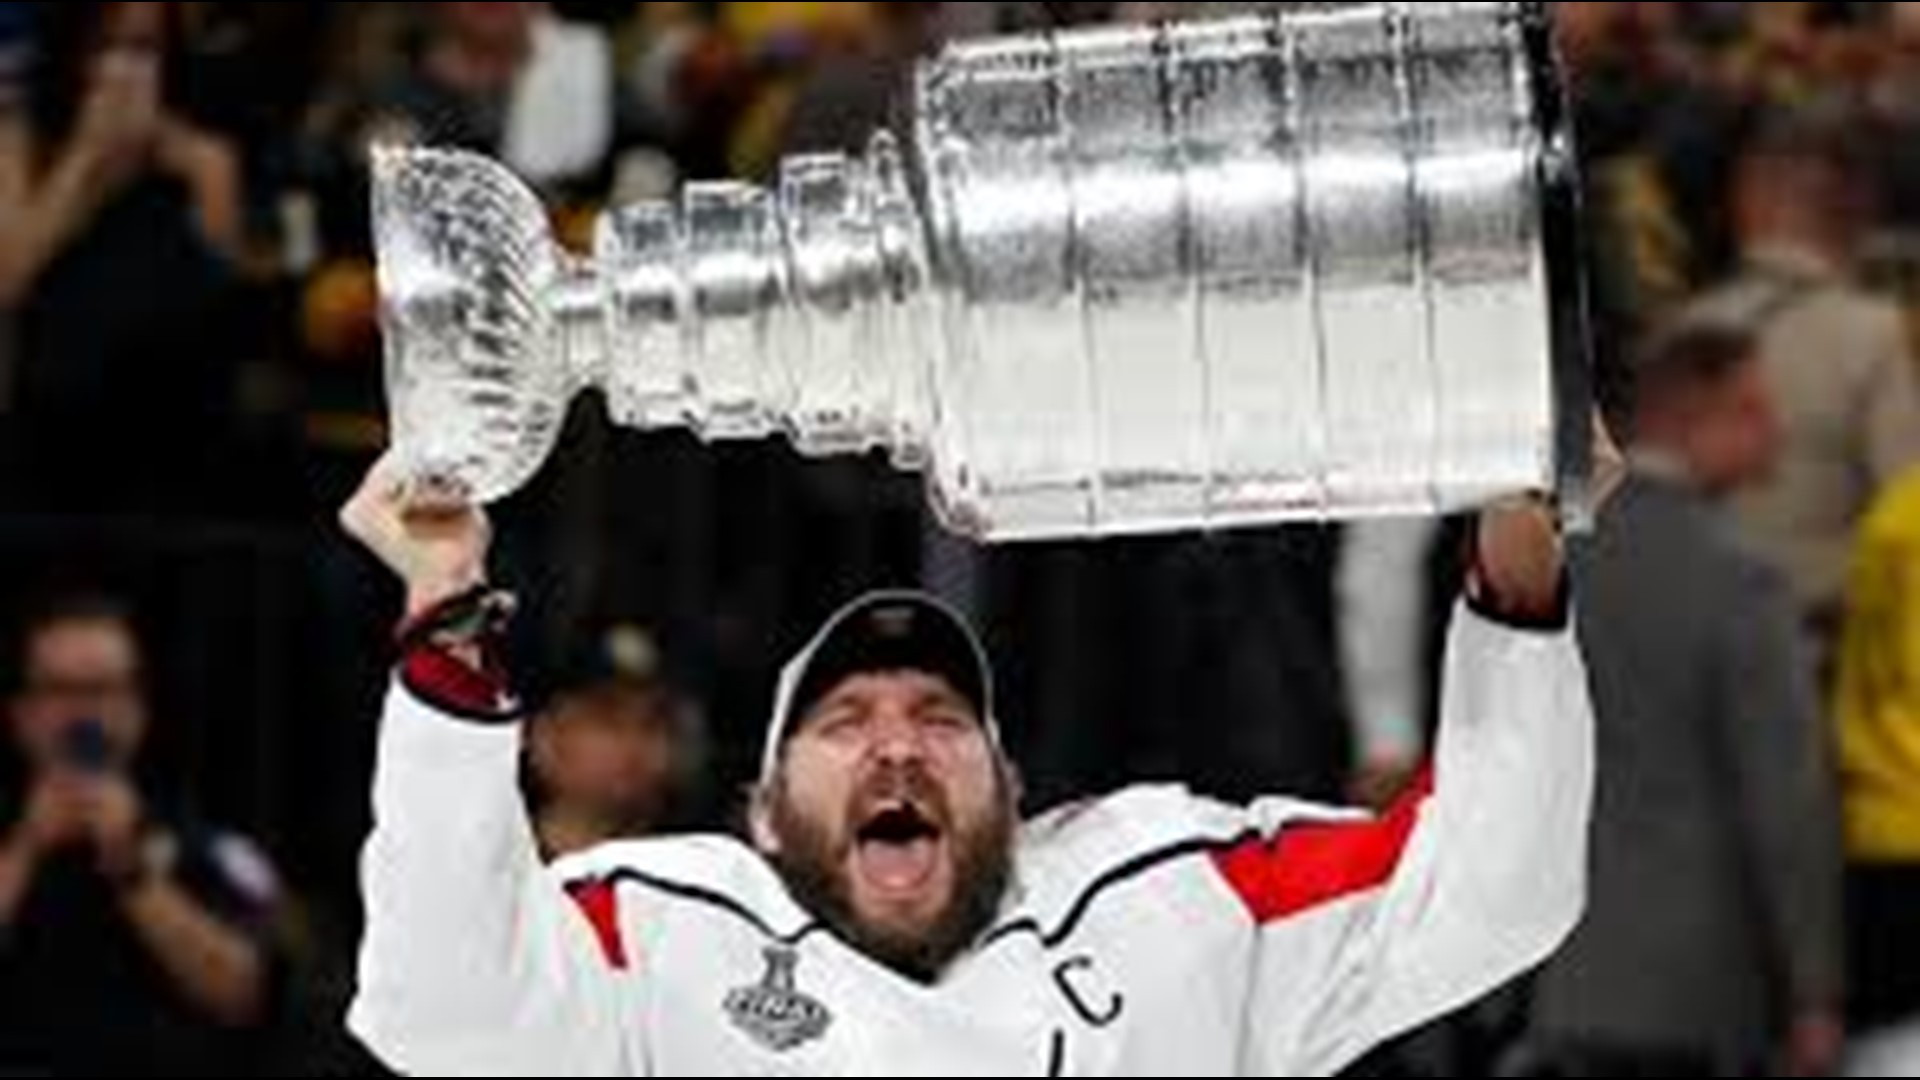 The Washington Capitals confirmed they will be joining President Donald Trump at the White House Monday, nearly 10 months after their Stanley Cup victory.